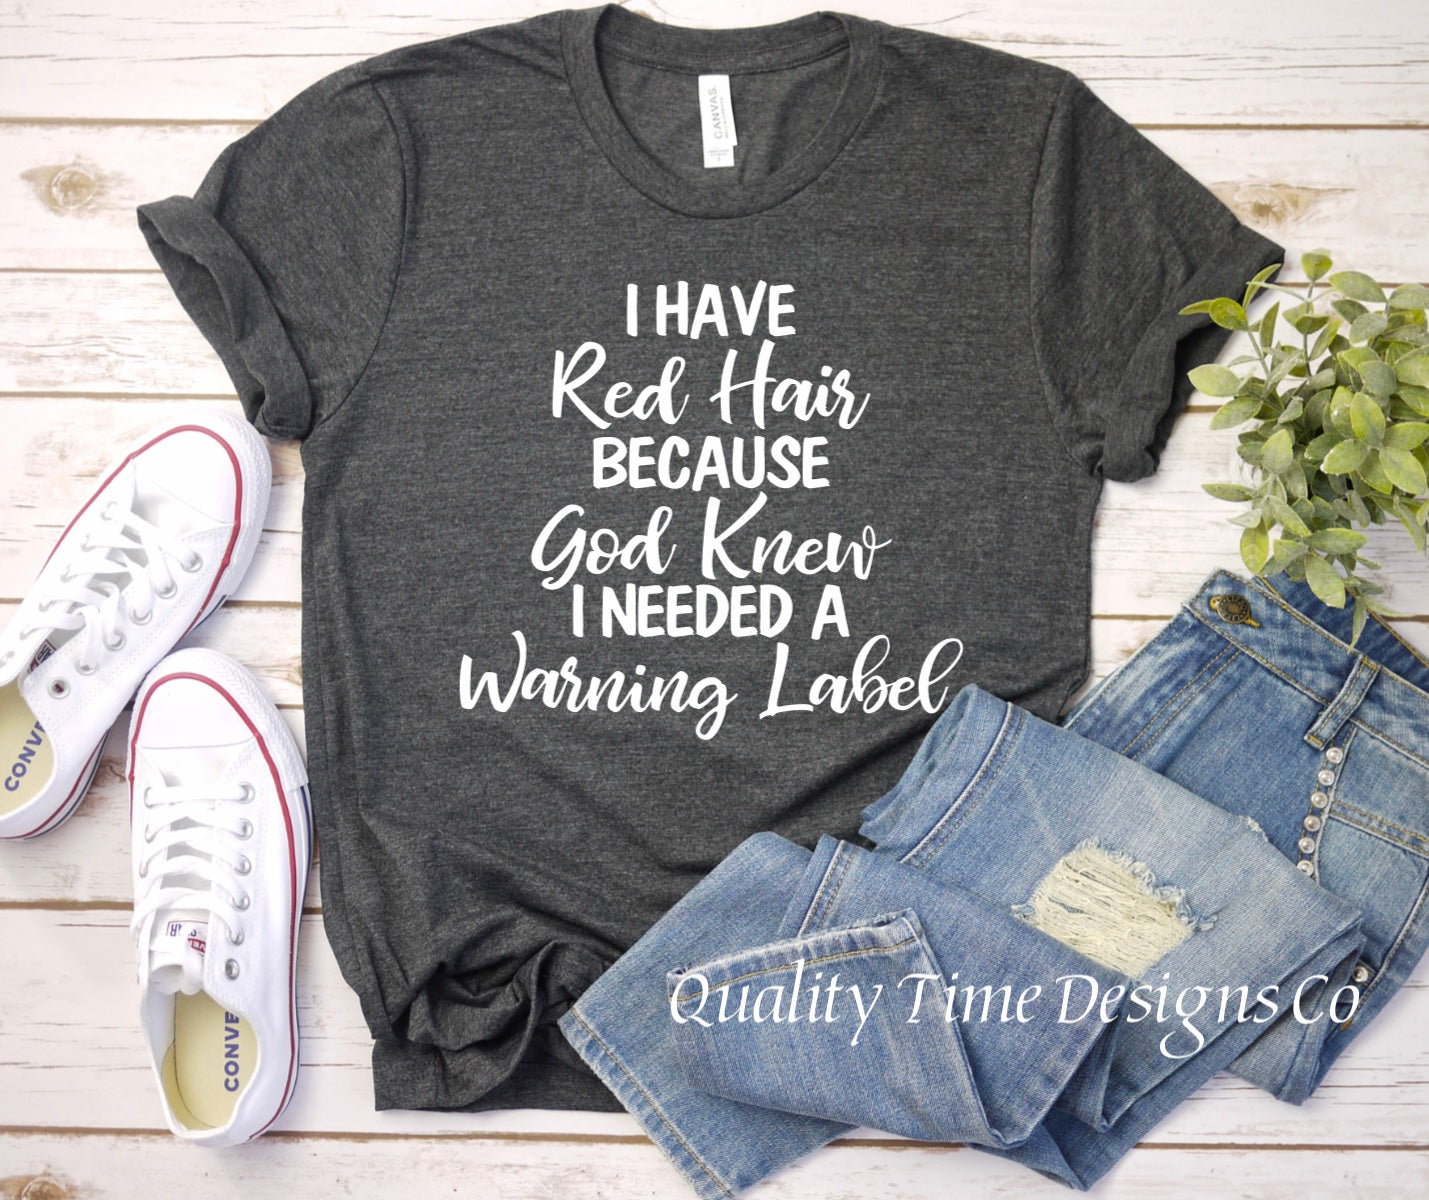 I have red hair because God knew I needed a warning label t shirt